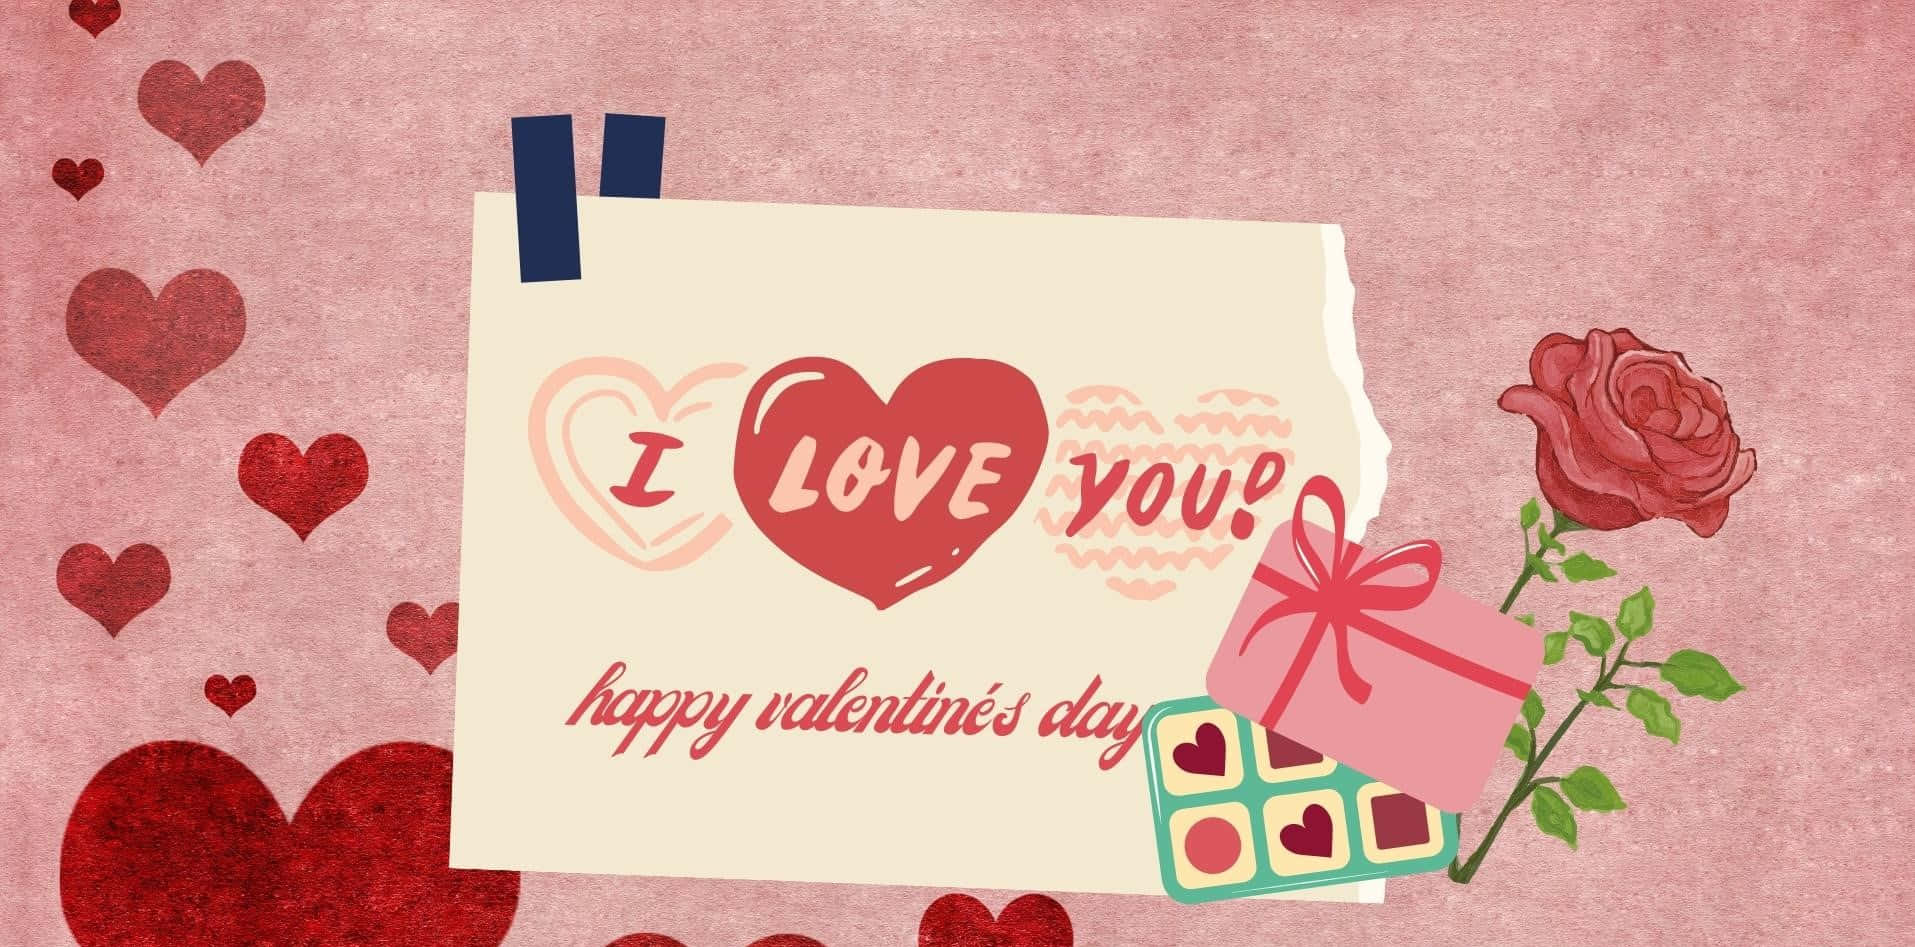 Celebrate This Day of Love with a Beautiful High Resolution Valentines Background